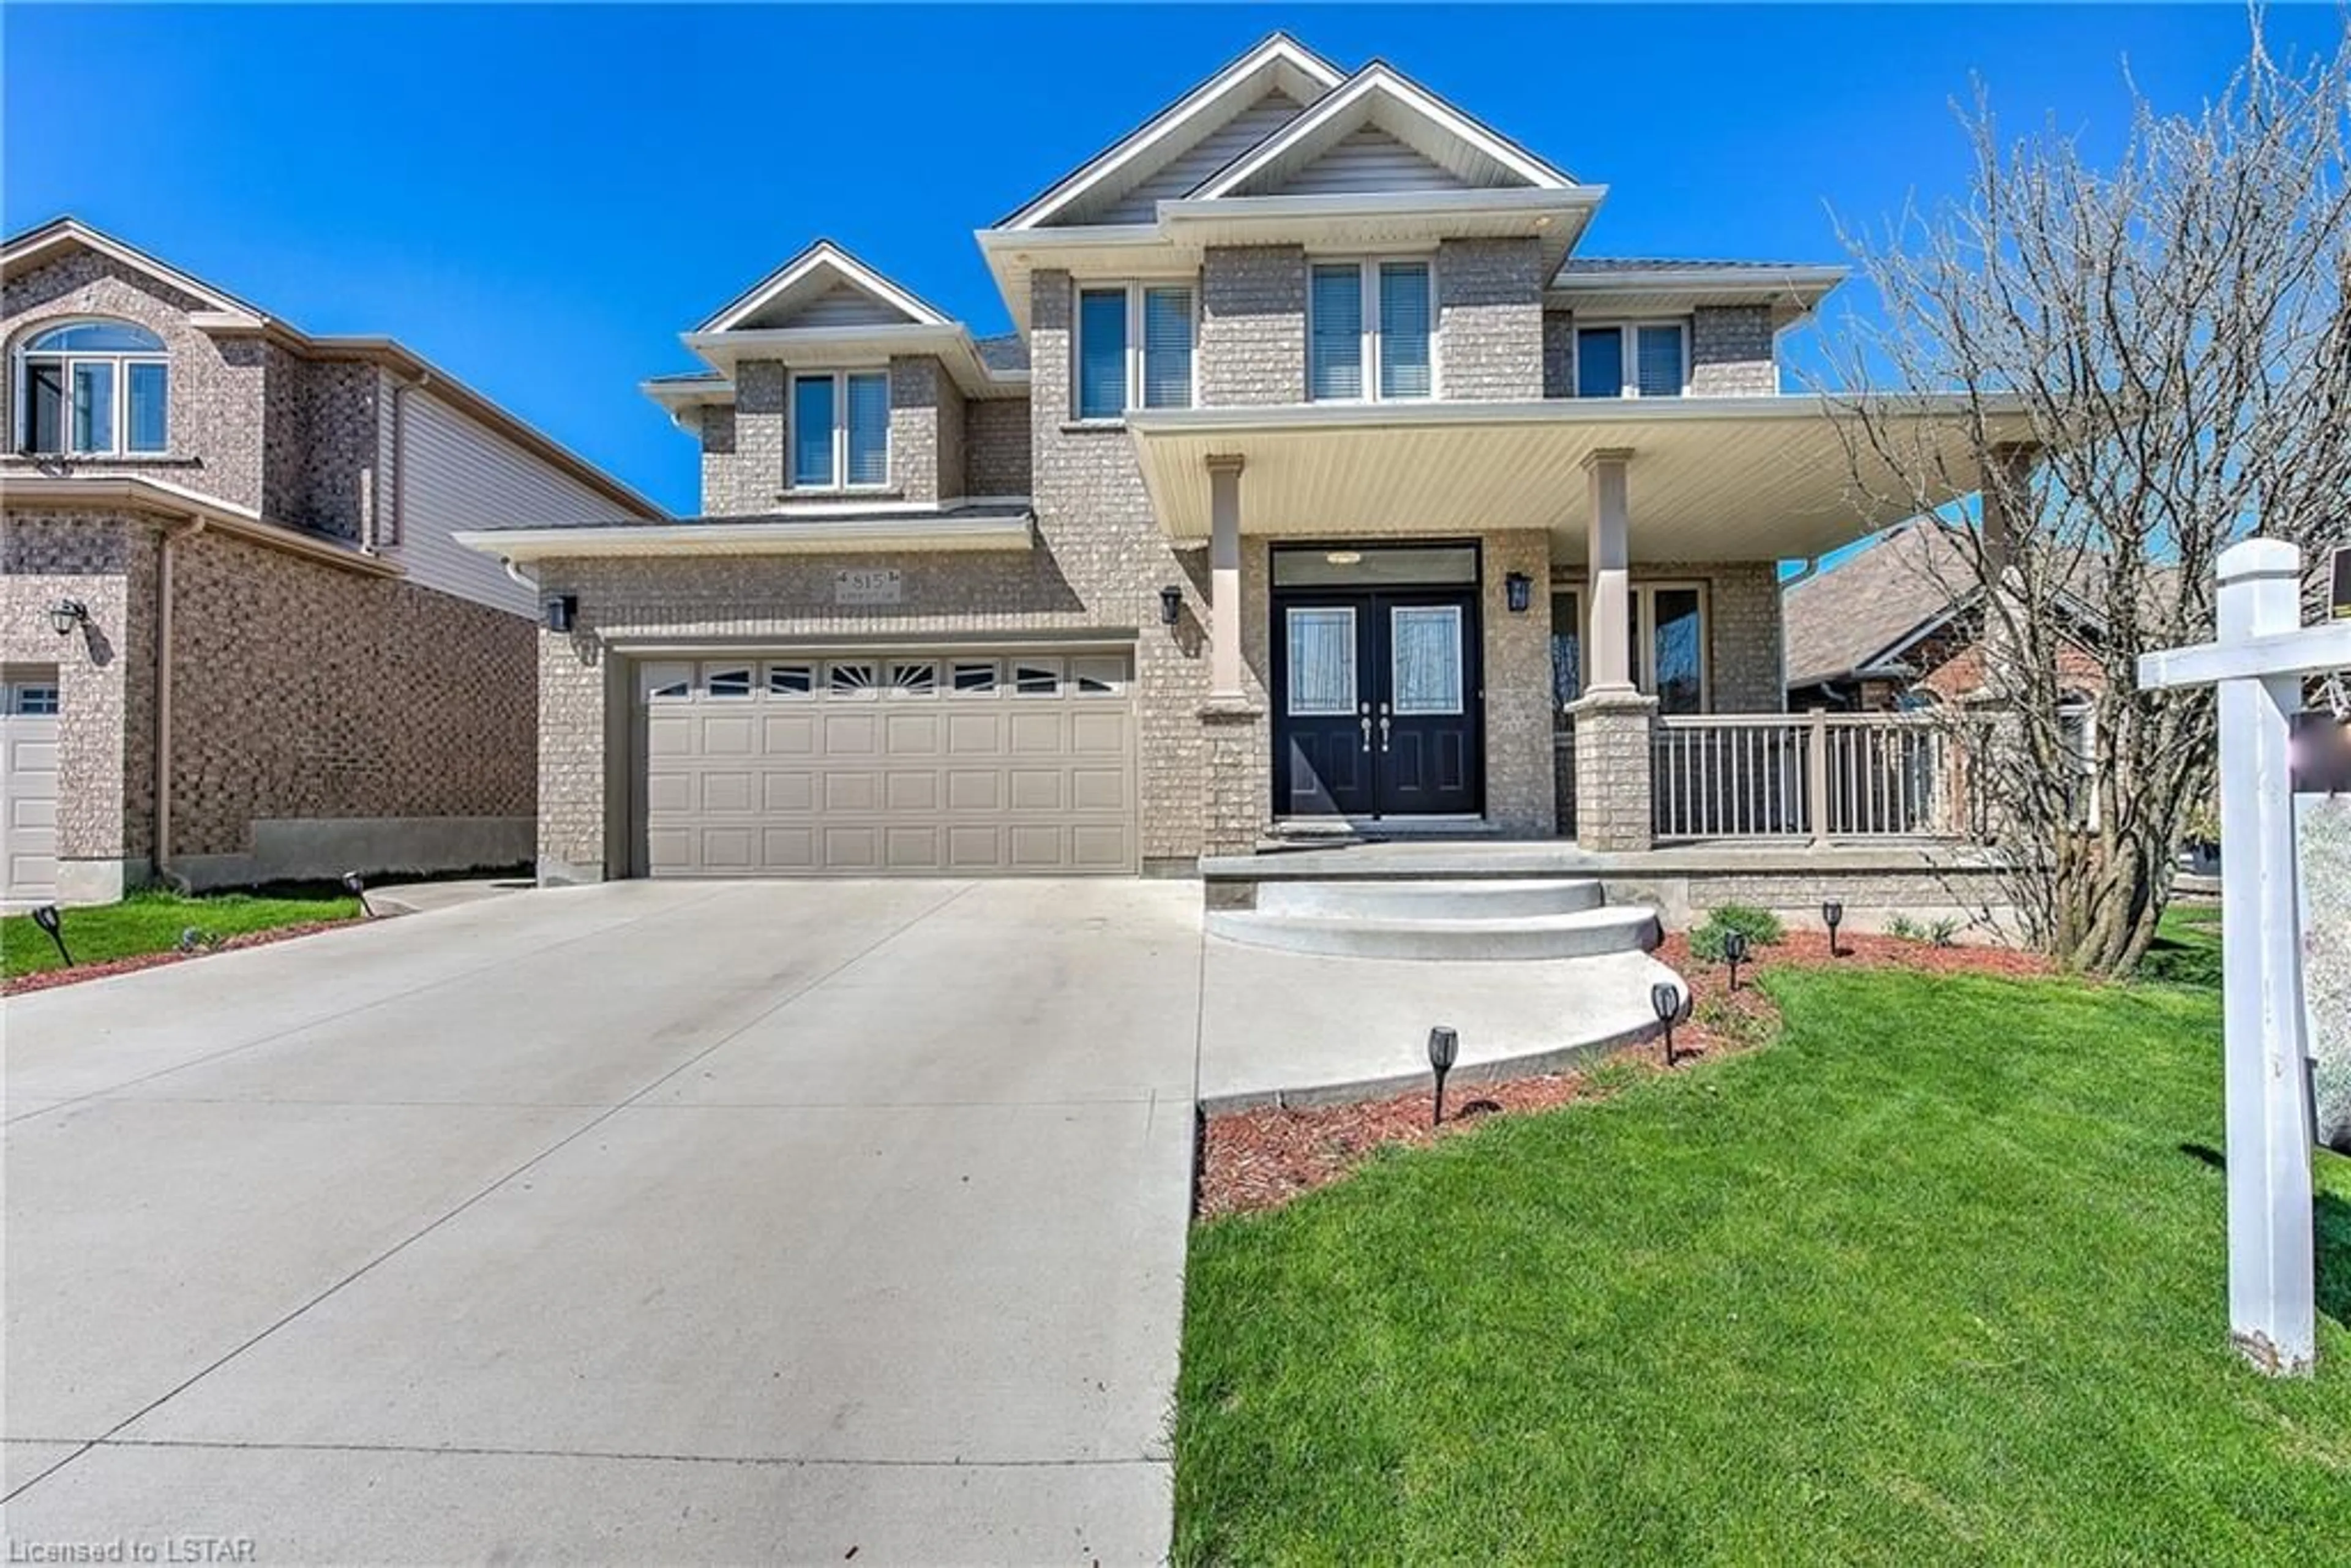 Frontside or backside of a home for 815 Apricot Dr, London Ontario N6K 5A8